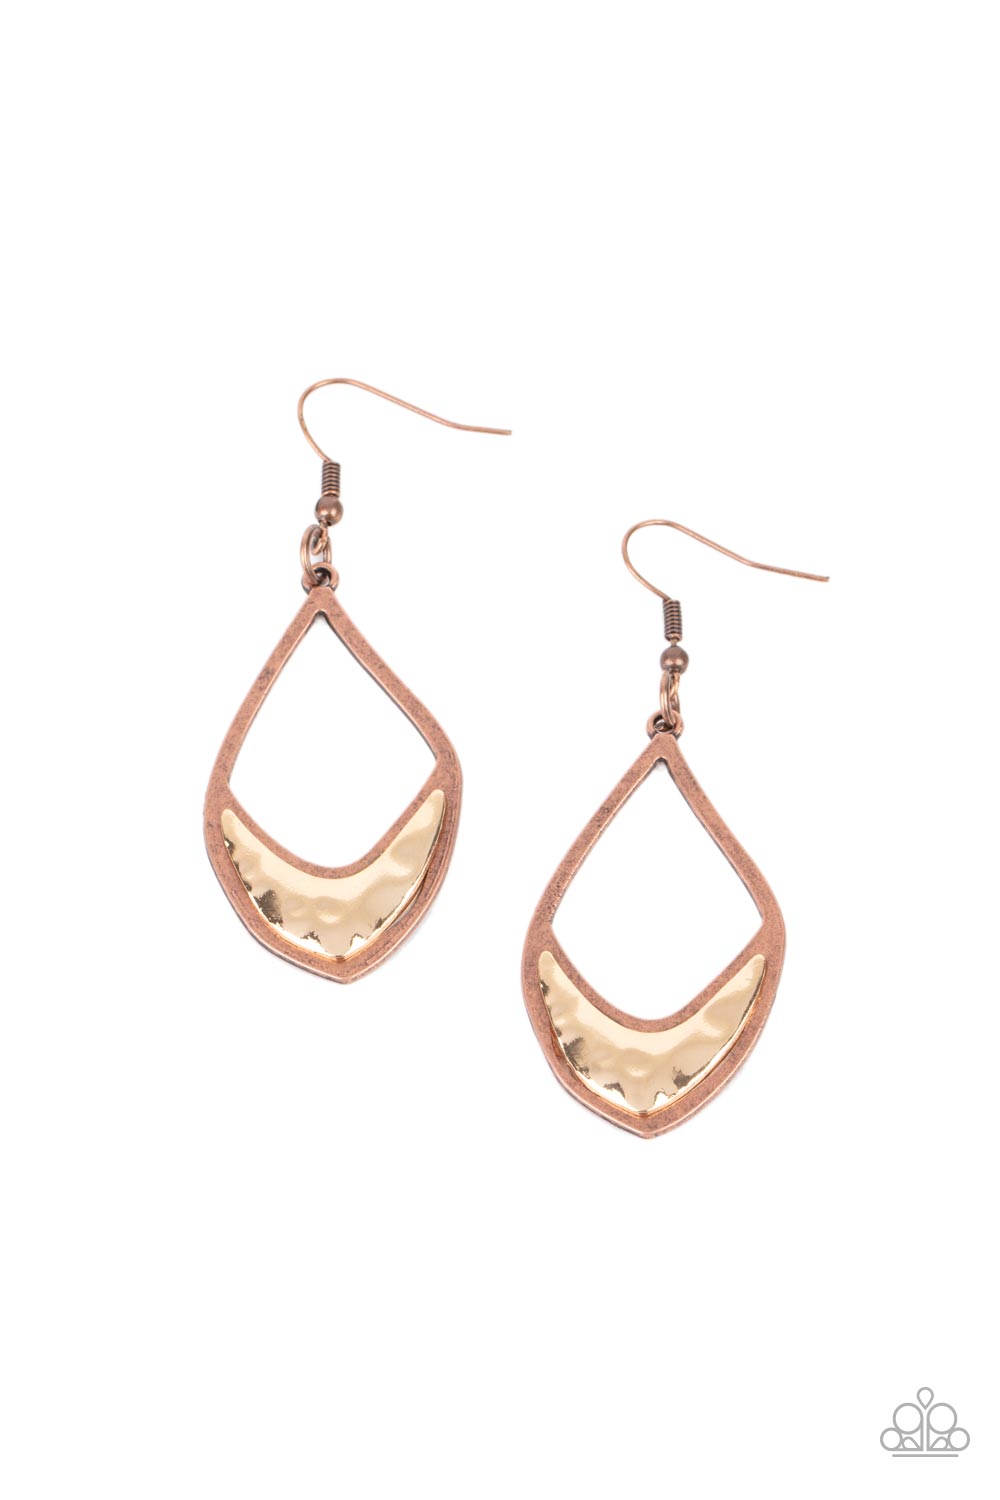 Artisan Treasure - Paparazzi - Adorned with a hammered gold geometrical accent, an asymmetrical copper teardrop frame swings from the ear for a rustic flair.